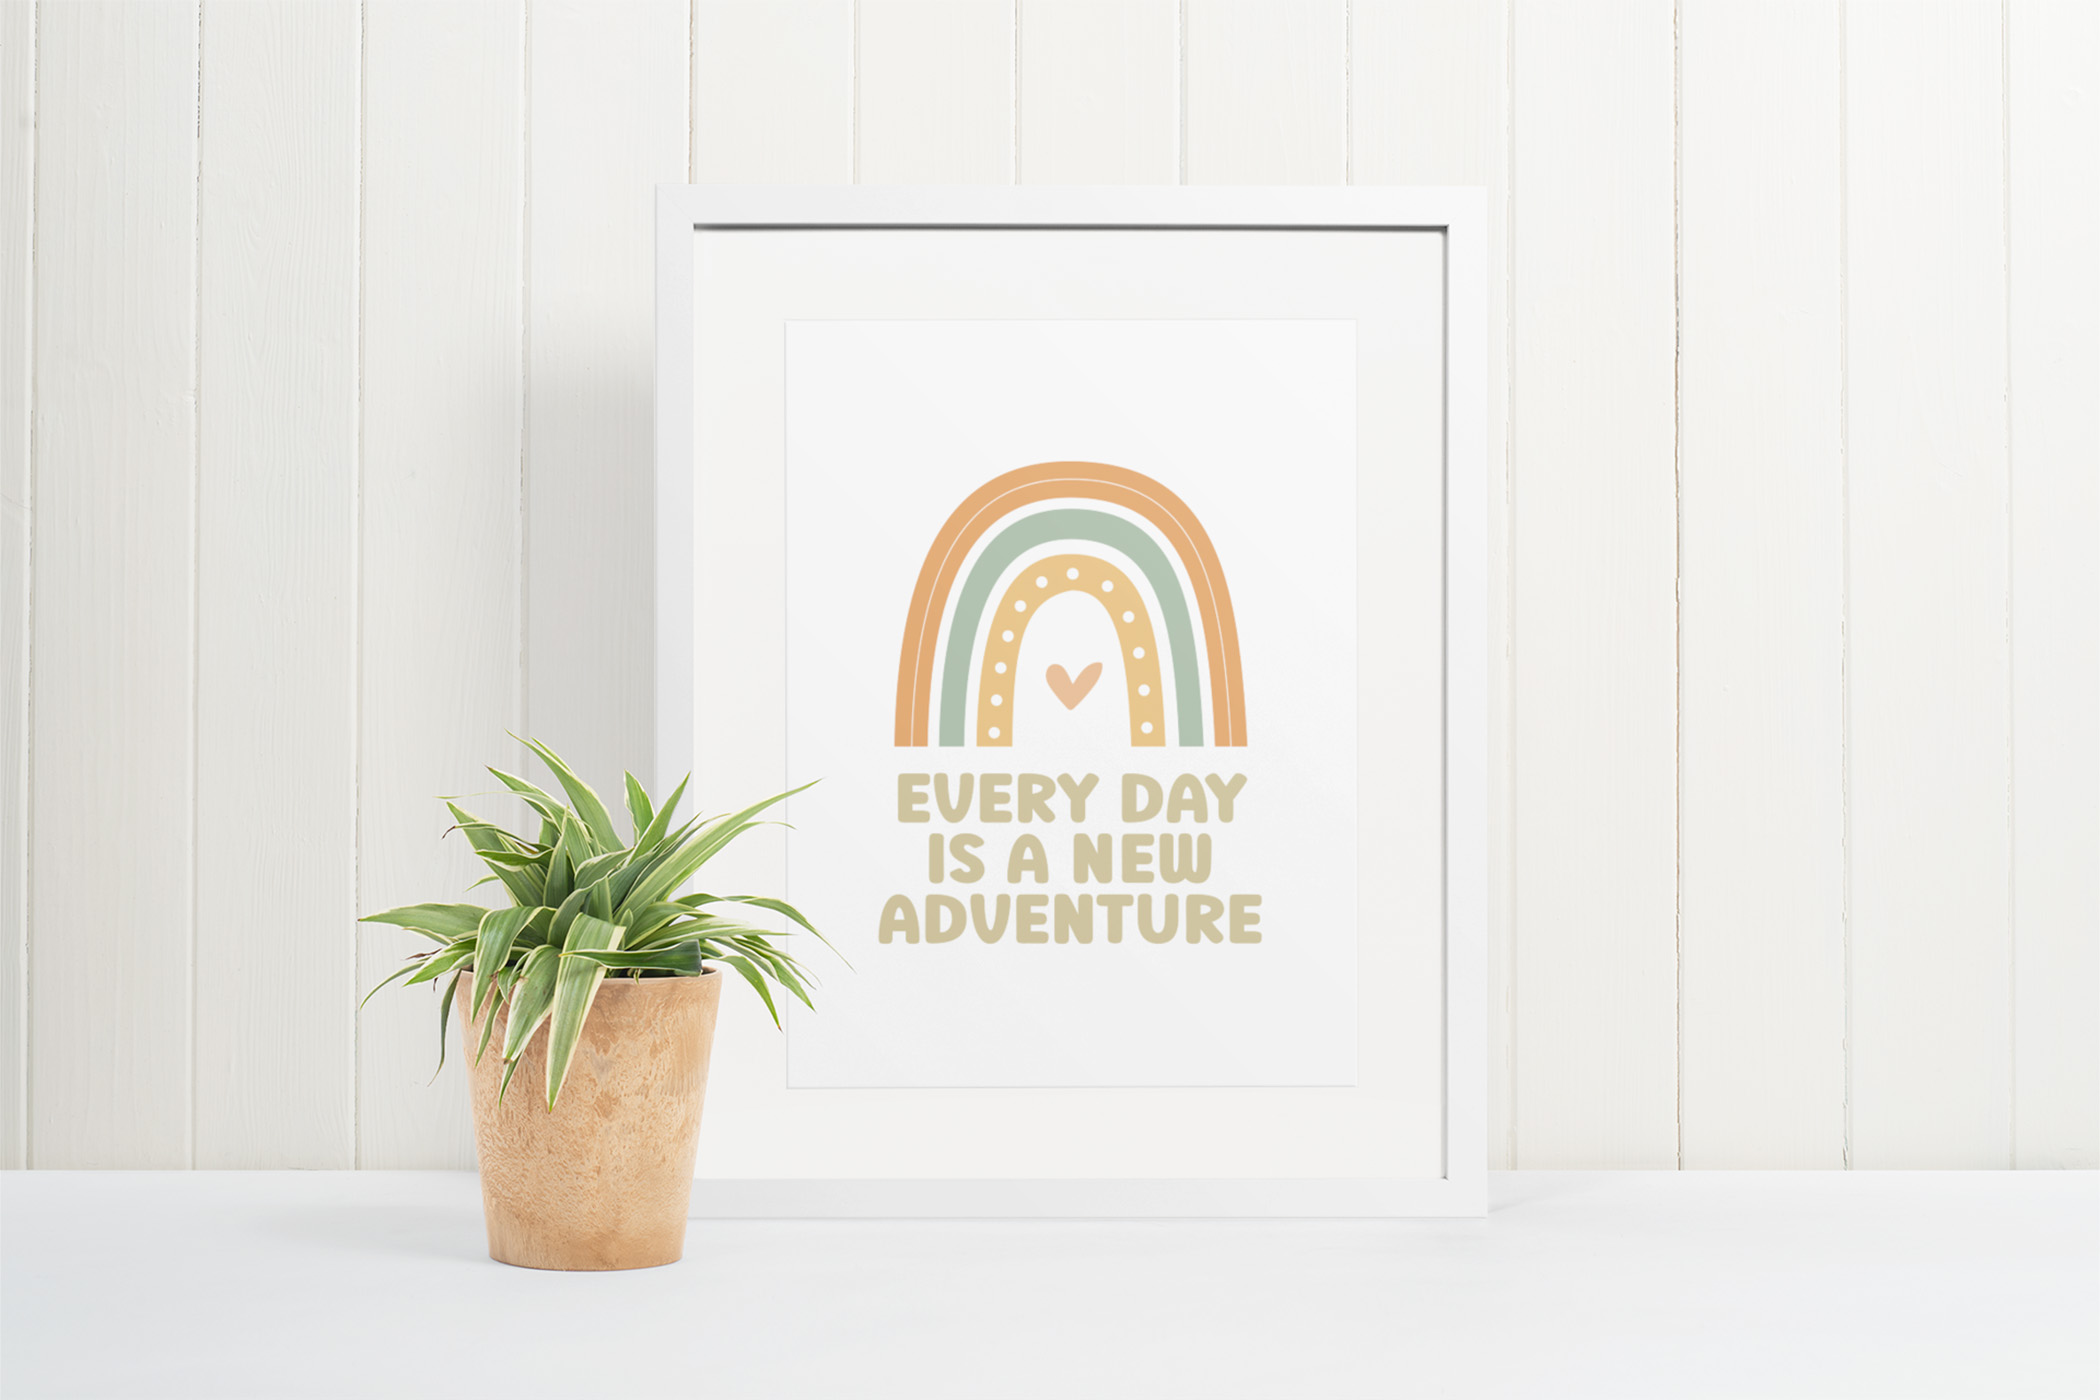 Love from J Everyday is a new adventure digital print in white frame